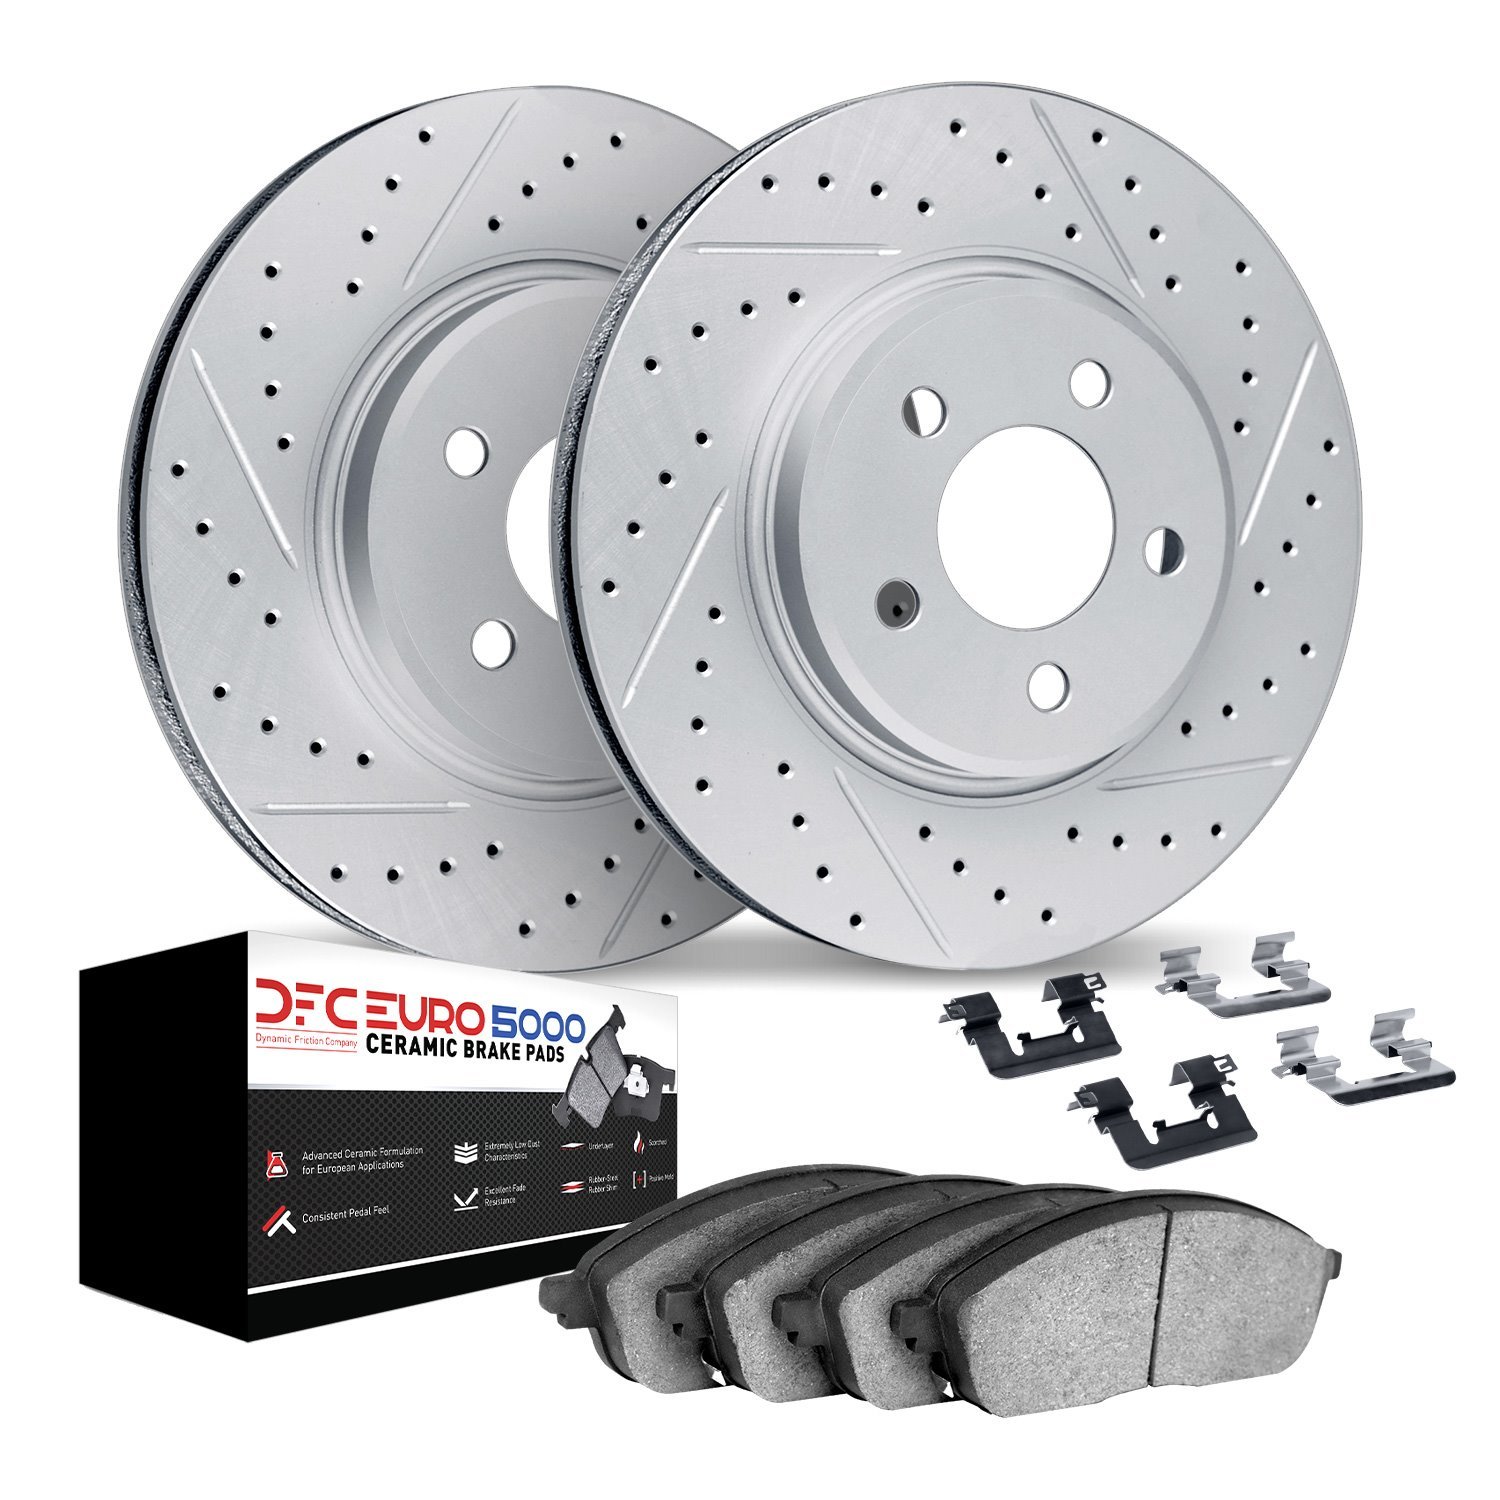 2612-39003 Geoperformance Drilled/Slotted Rotors w/5000 Euro Ceramic Brake Pads Kit & Hardware, Fits Select Mopar, Position: Fro